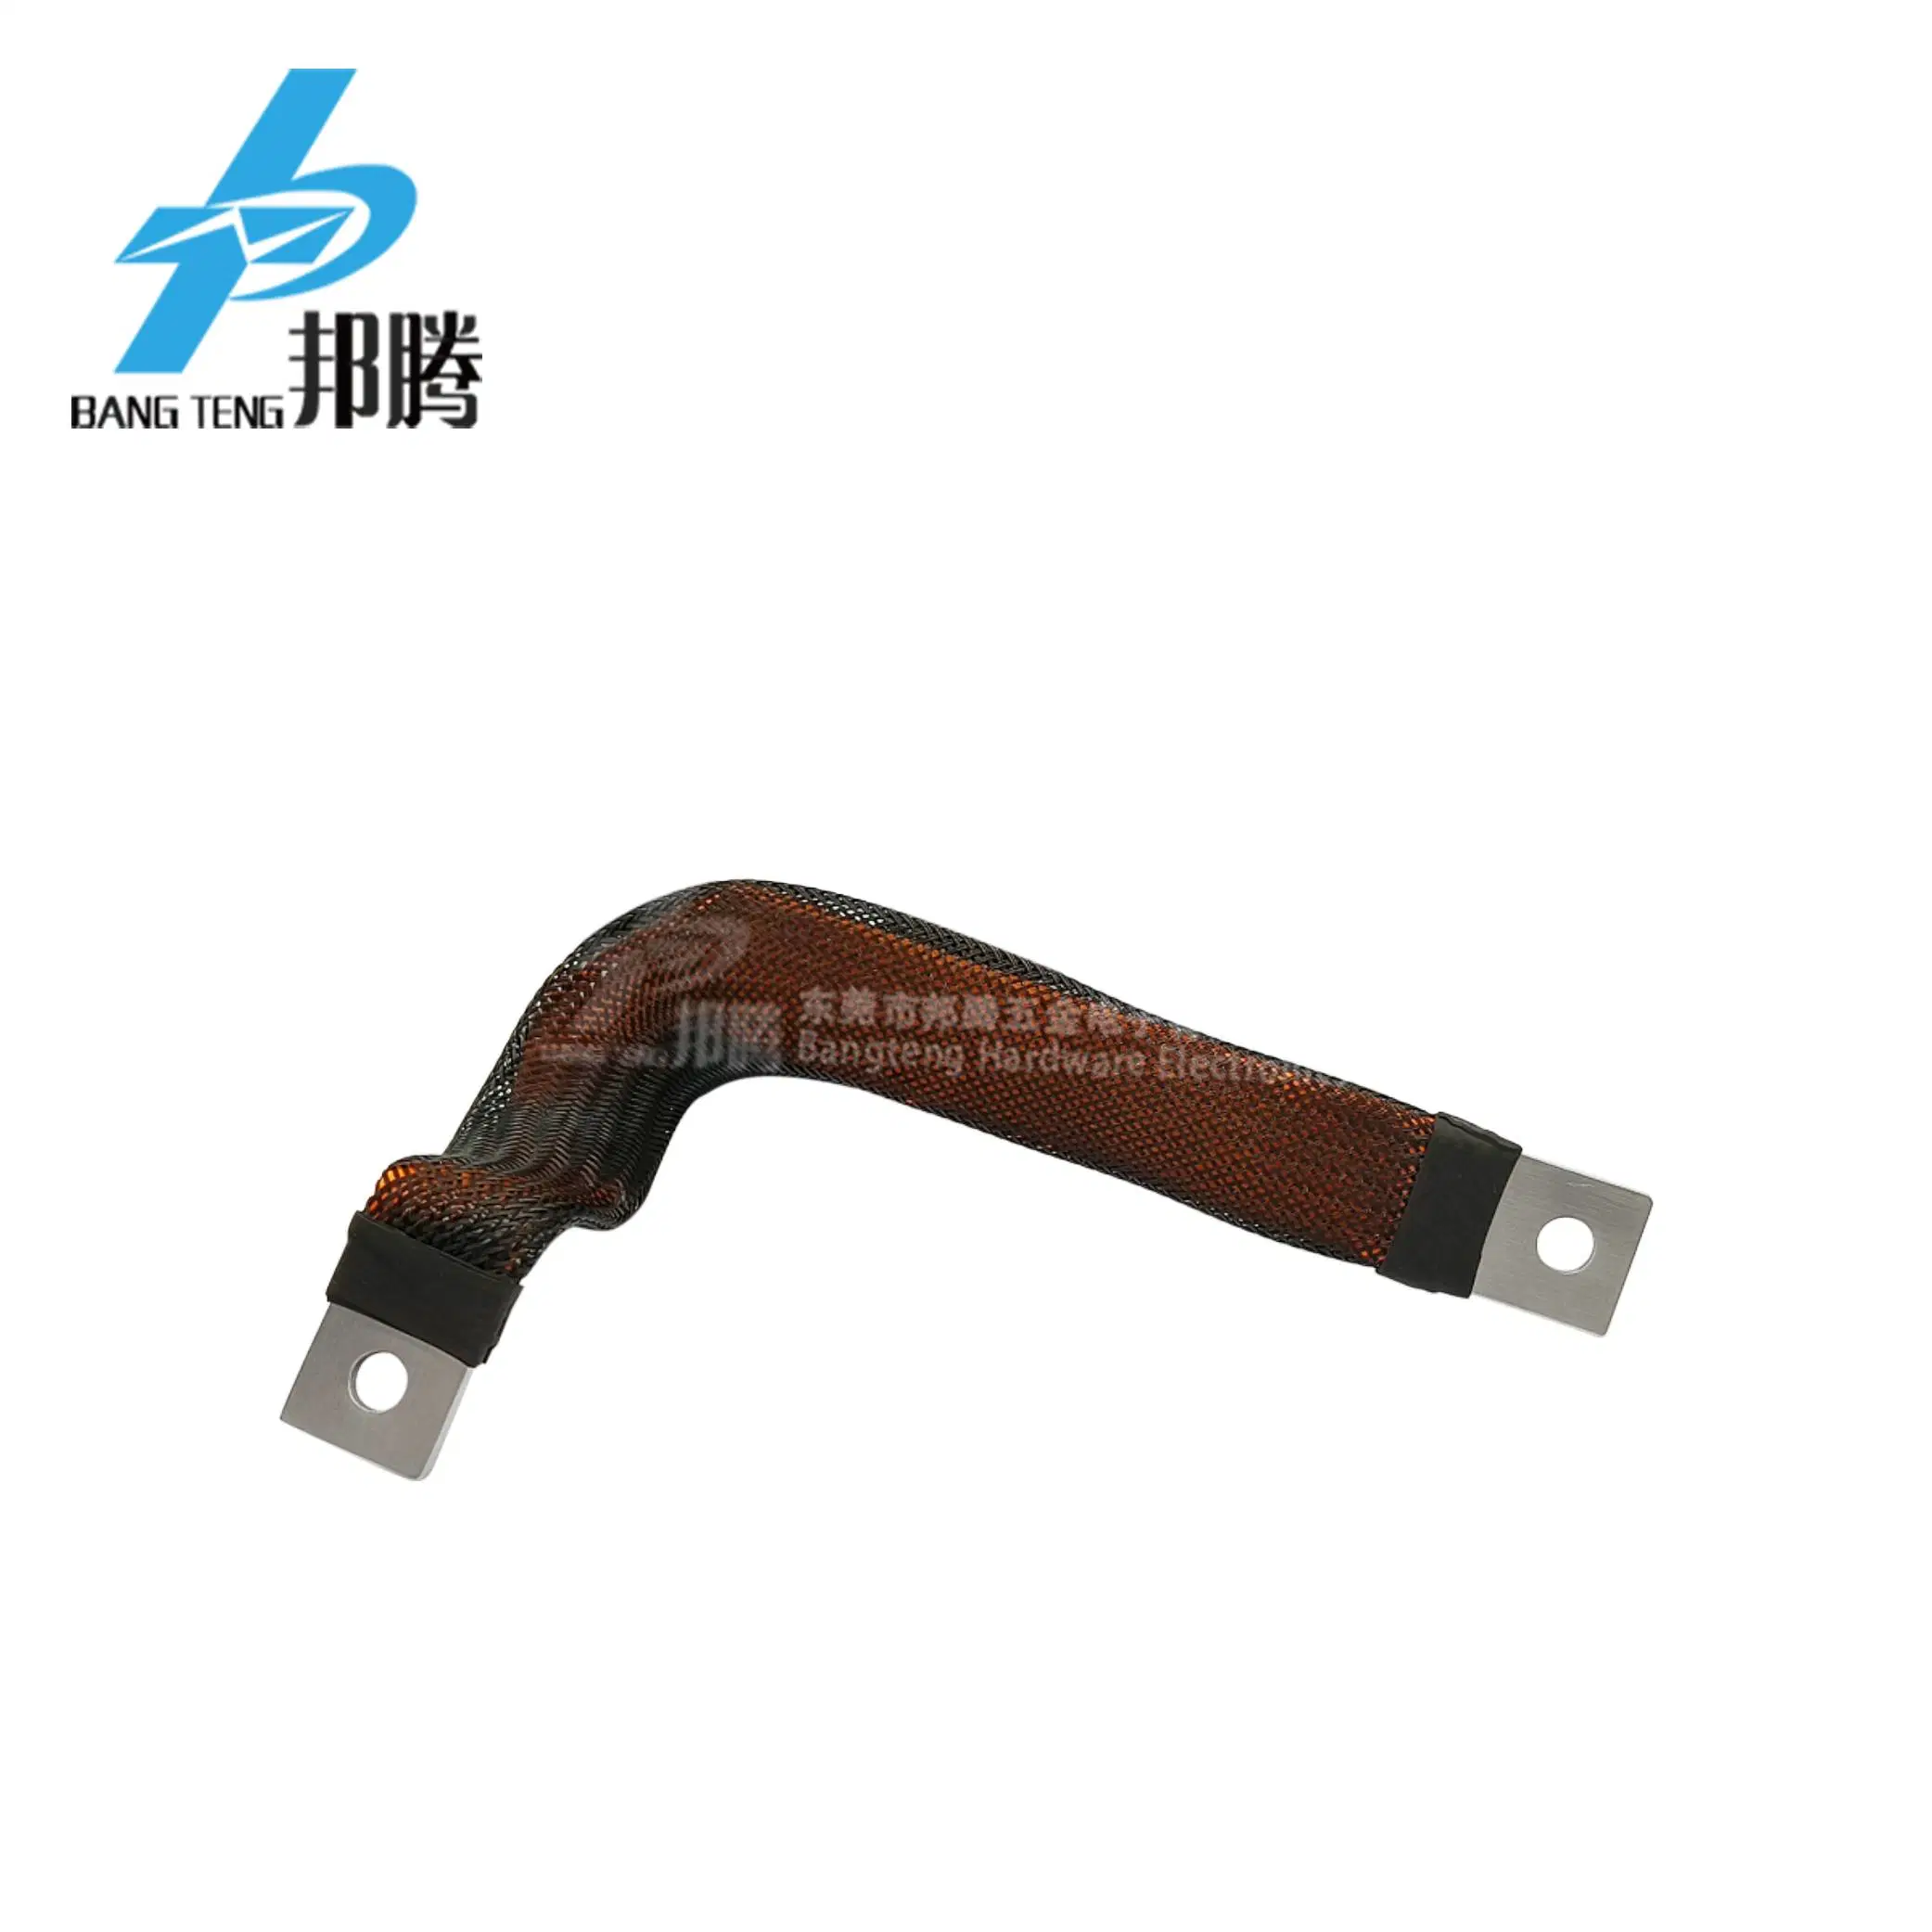 Custom Soft Copper Busbar Flexible Busbar with Weaving Mesh Tube and End Covers